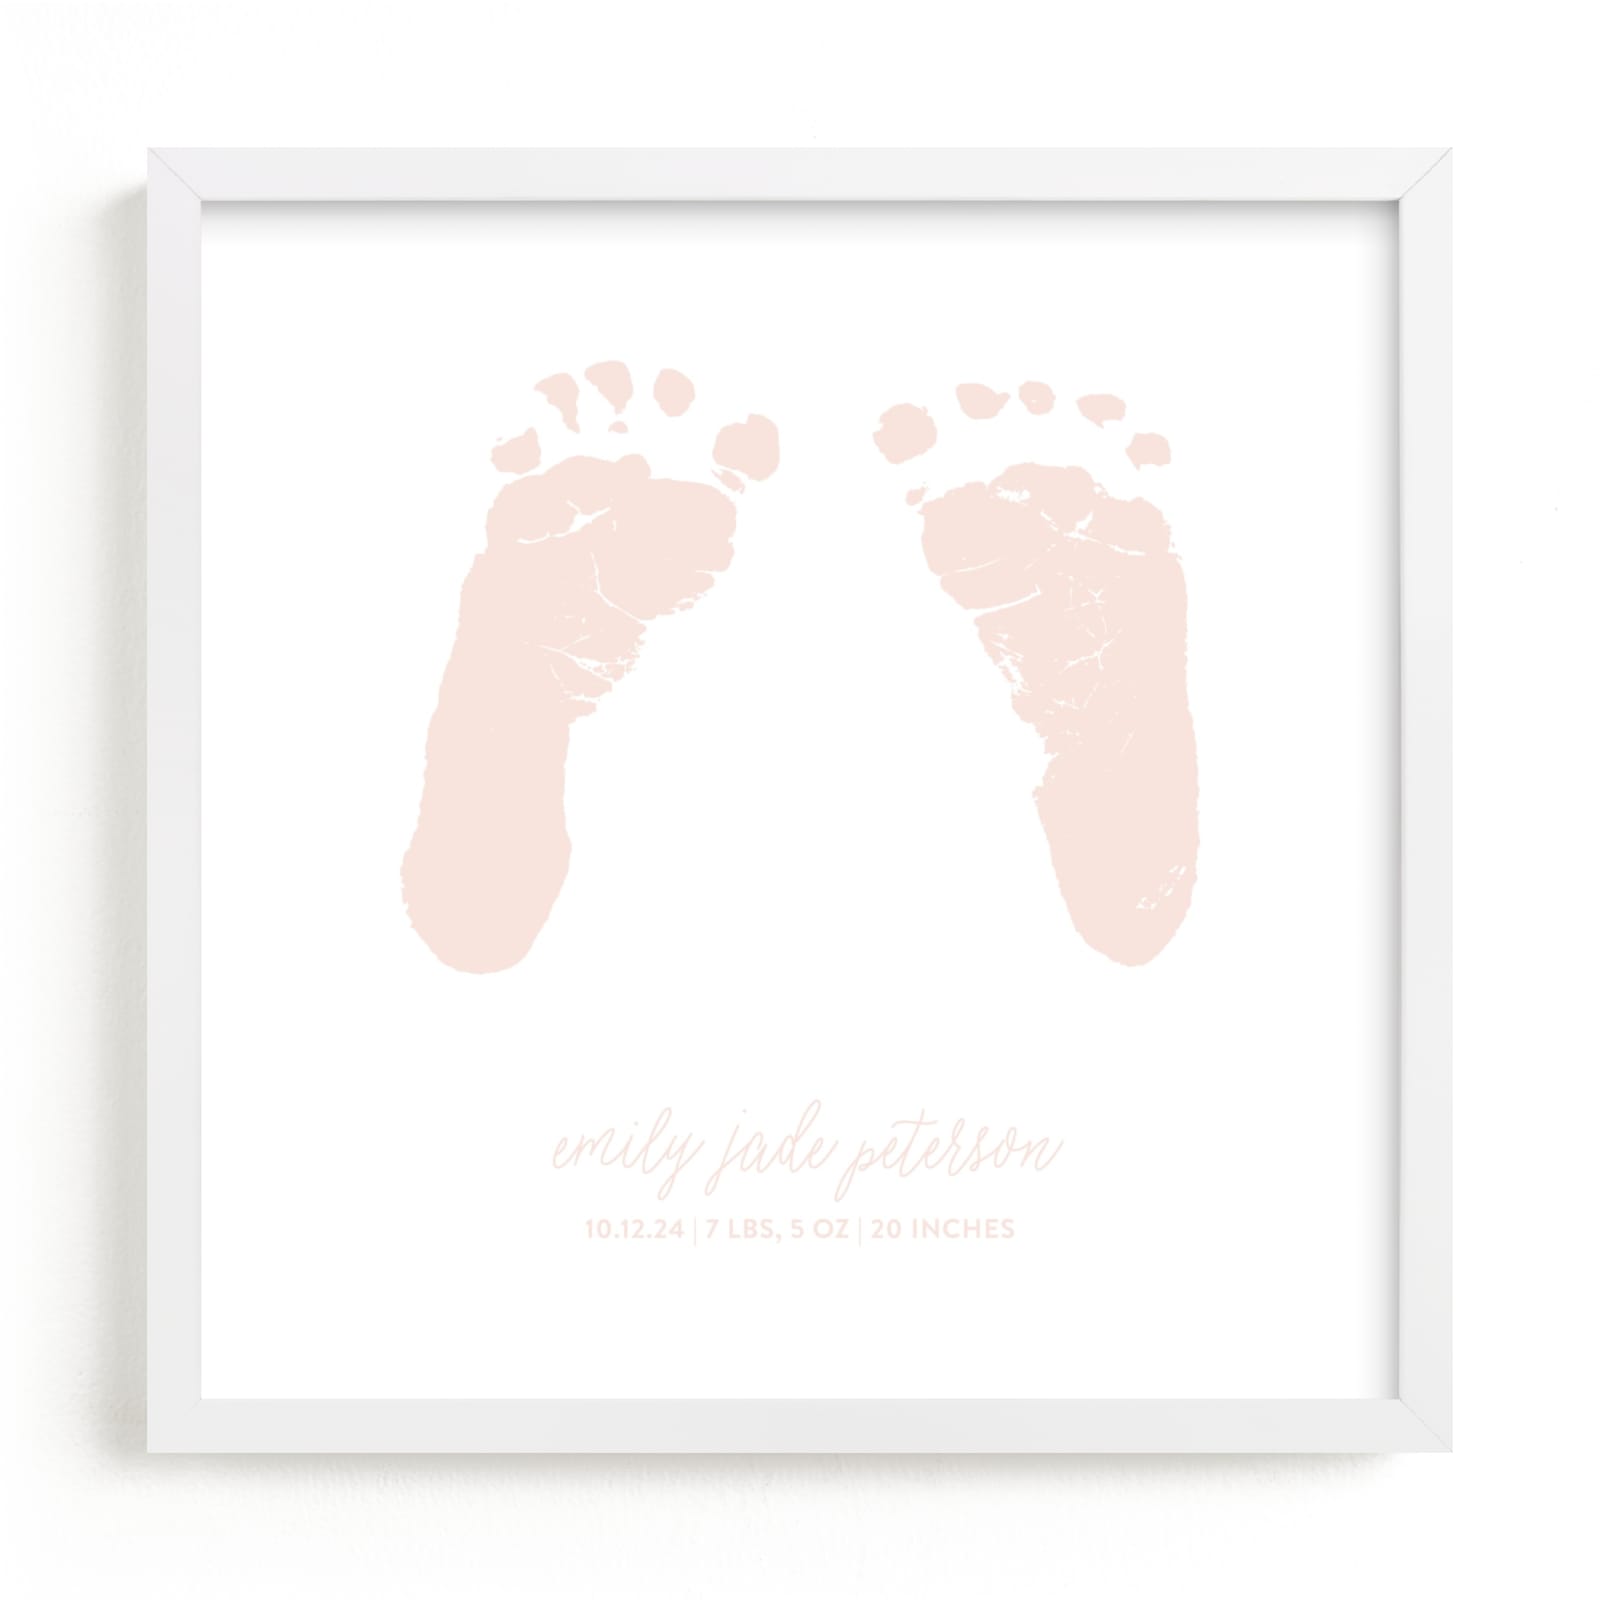 This is a pink photos to art by Minted called Custom Footprints Letterpress Art.